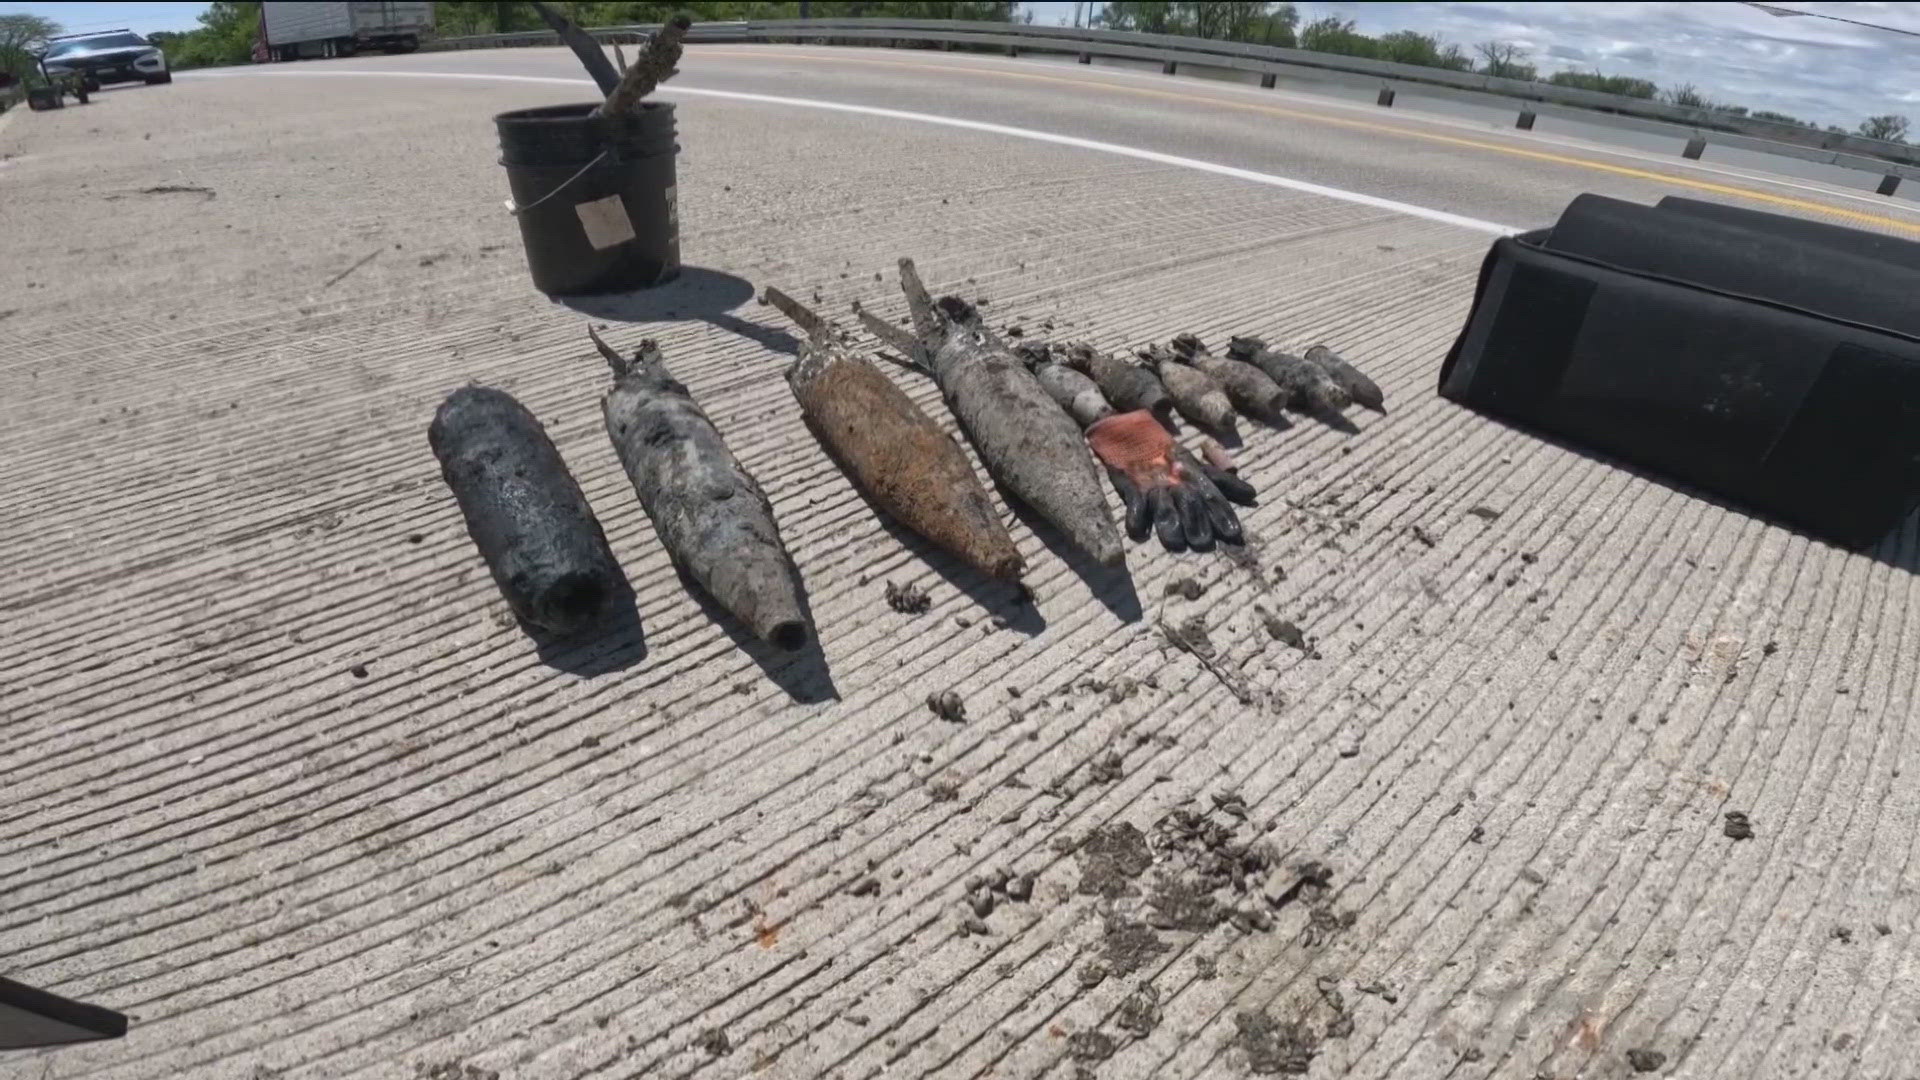 Motor City Magnet Fishers pulled the ordinances from the river and called in the Northwest Ohio Bomb Squad. A second trip brought up even more of the explosives.